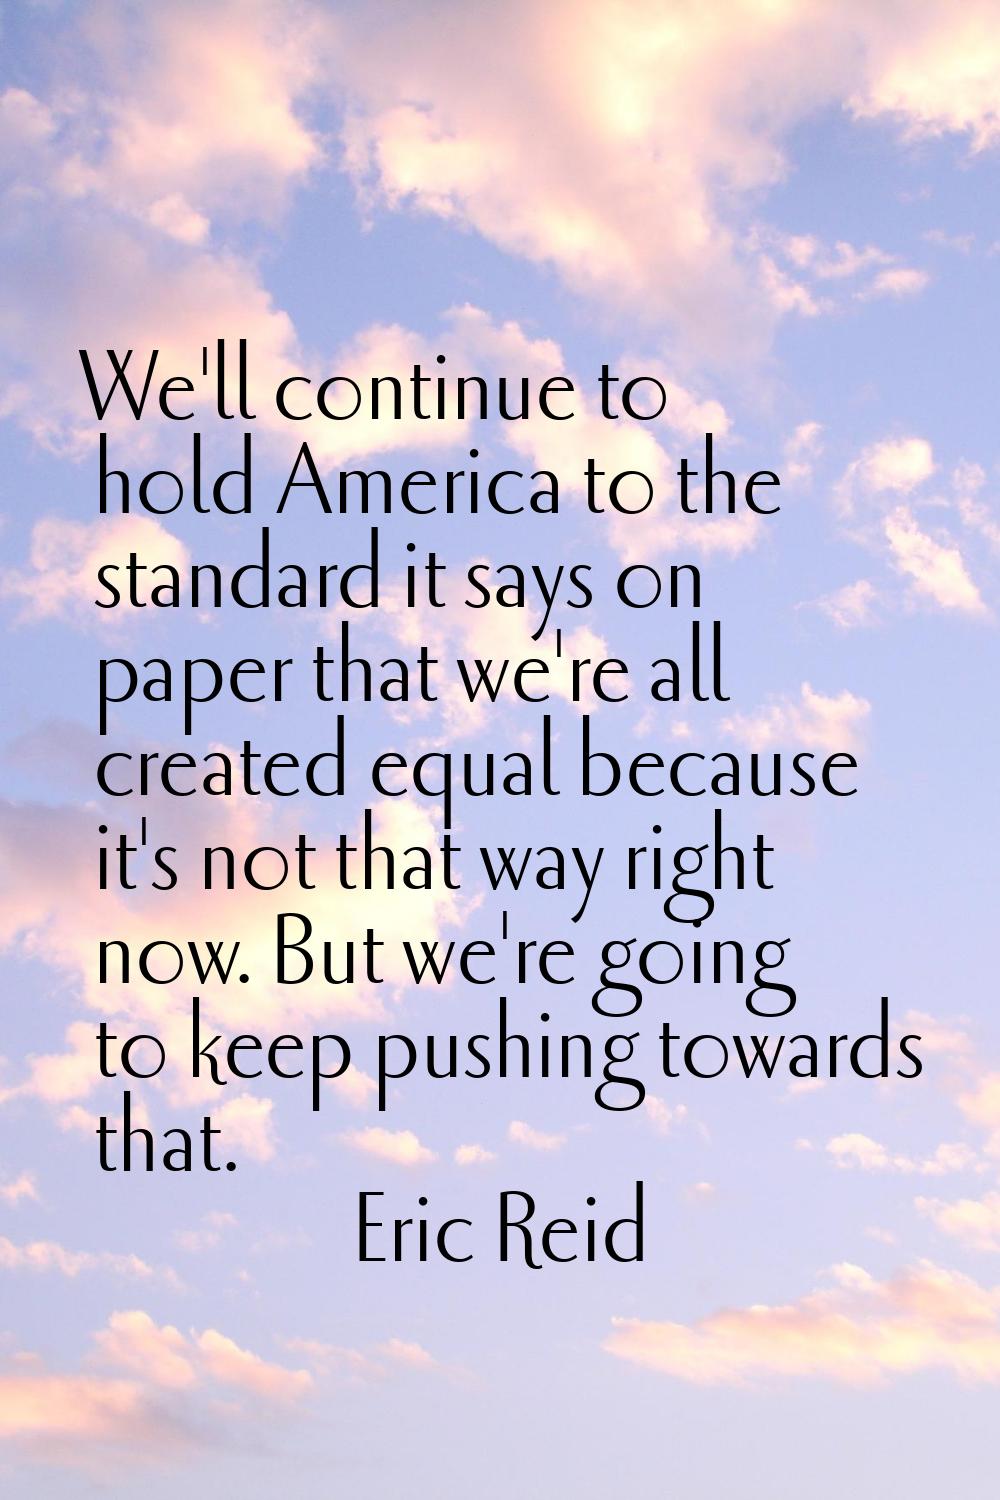 We'll continue to hold America to the standard it says on paper that we're all created equal becaus